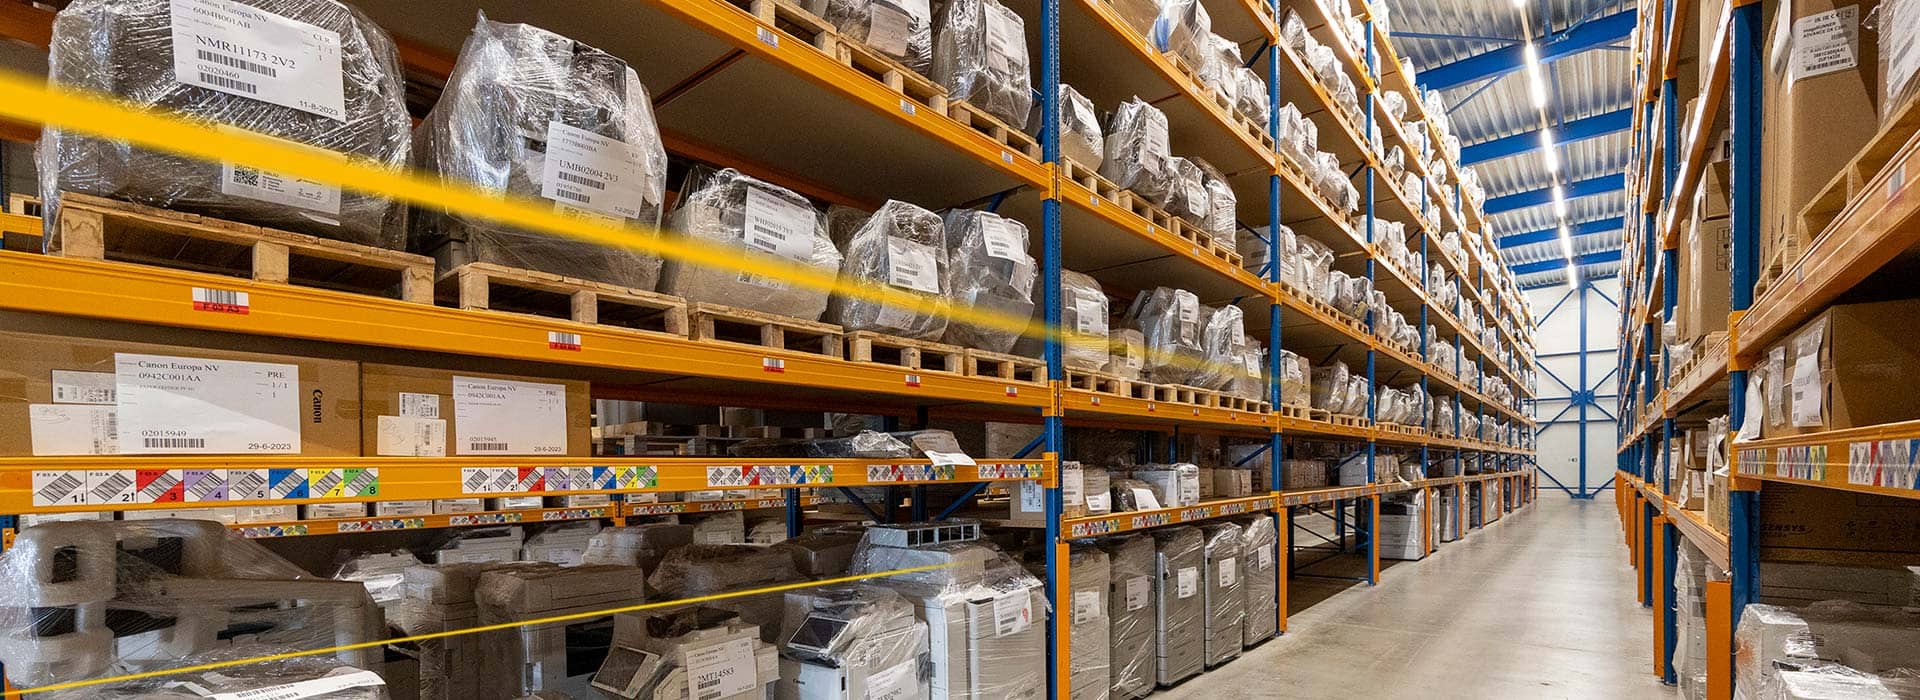 Packaged technical equipment in LGI-warehouse